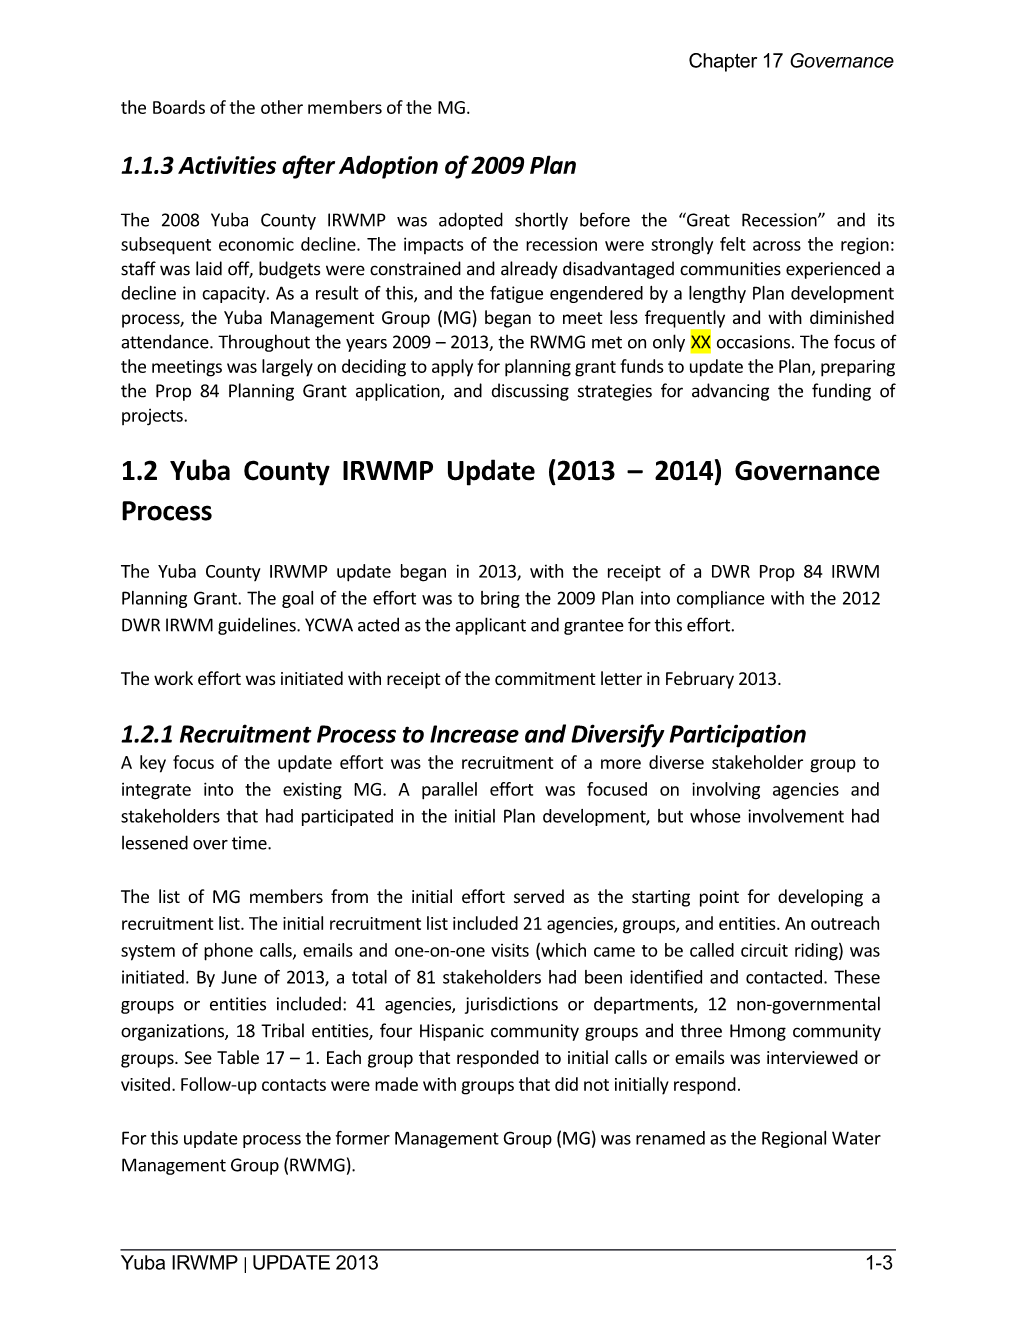 1.1 Governance, Adoption and Implementation 2009 IRWMP